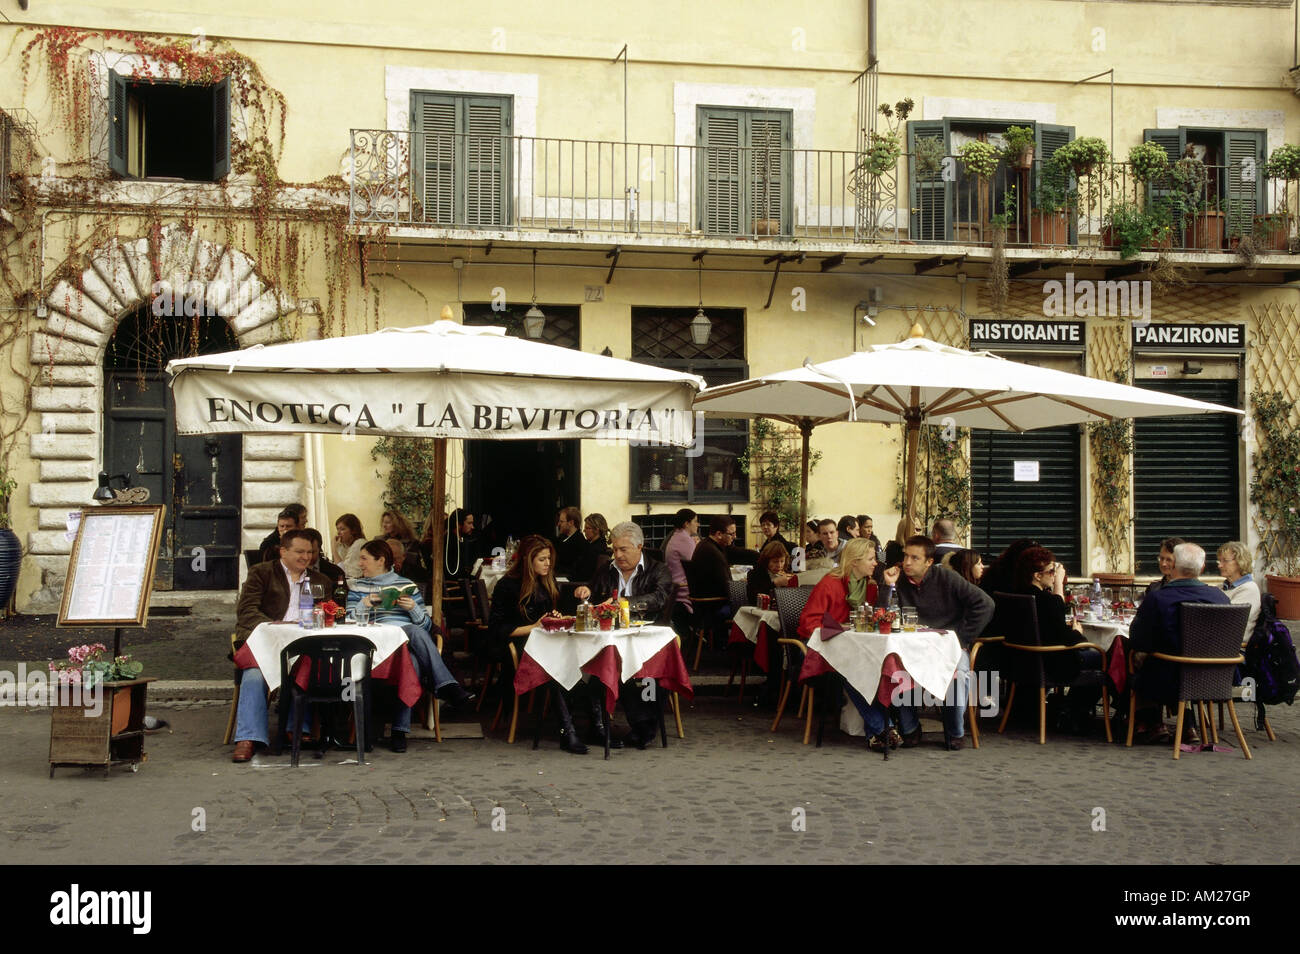 Geographie/Reisen, Italien, Rom, Gastronomie, Cafe'Enoteca la Bevitoria", Piazza Navona, Additional-Rights - Clearance-Info - Not-Available Stockfoto